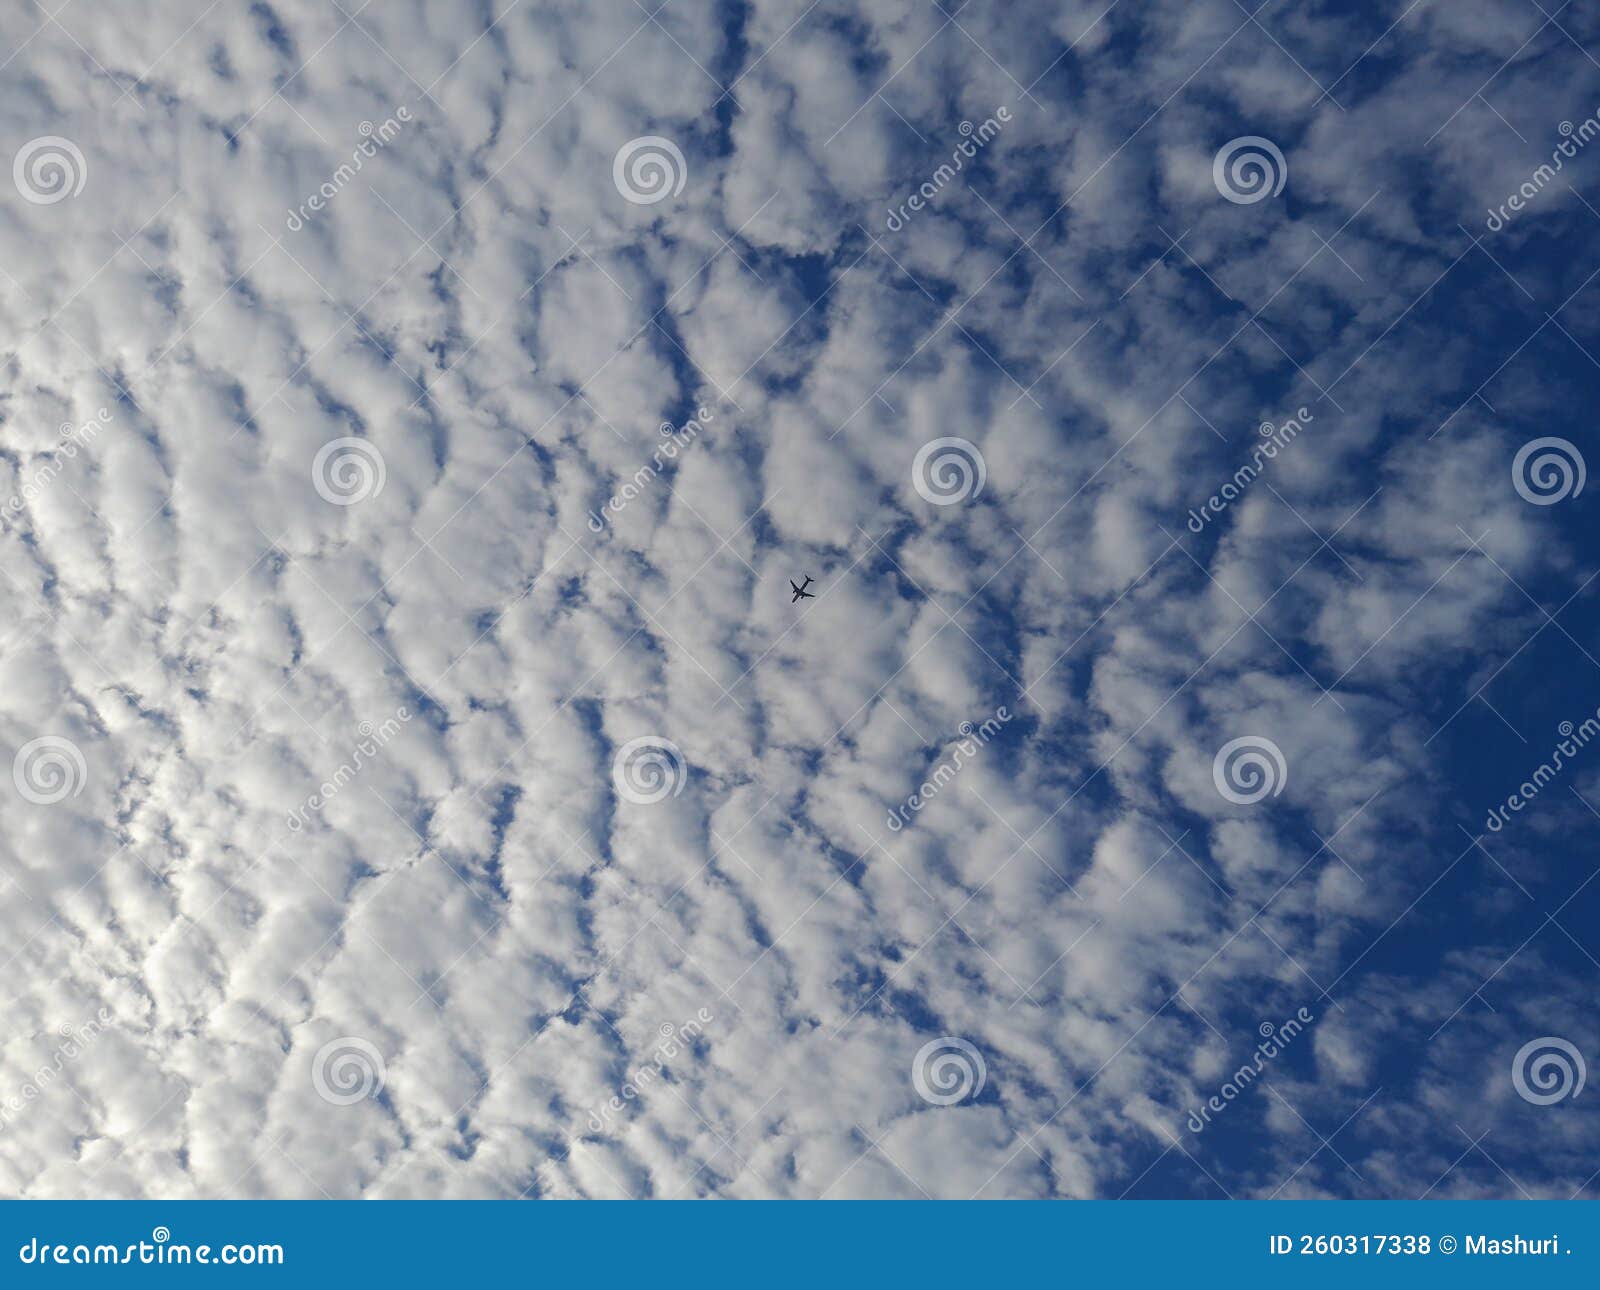 blue sky background with clouds. cirro-cumulus clouds on a blue sky on a sunny day. cirrus sky. the plane is crossing the clouds